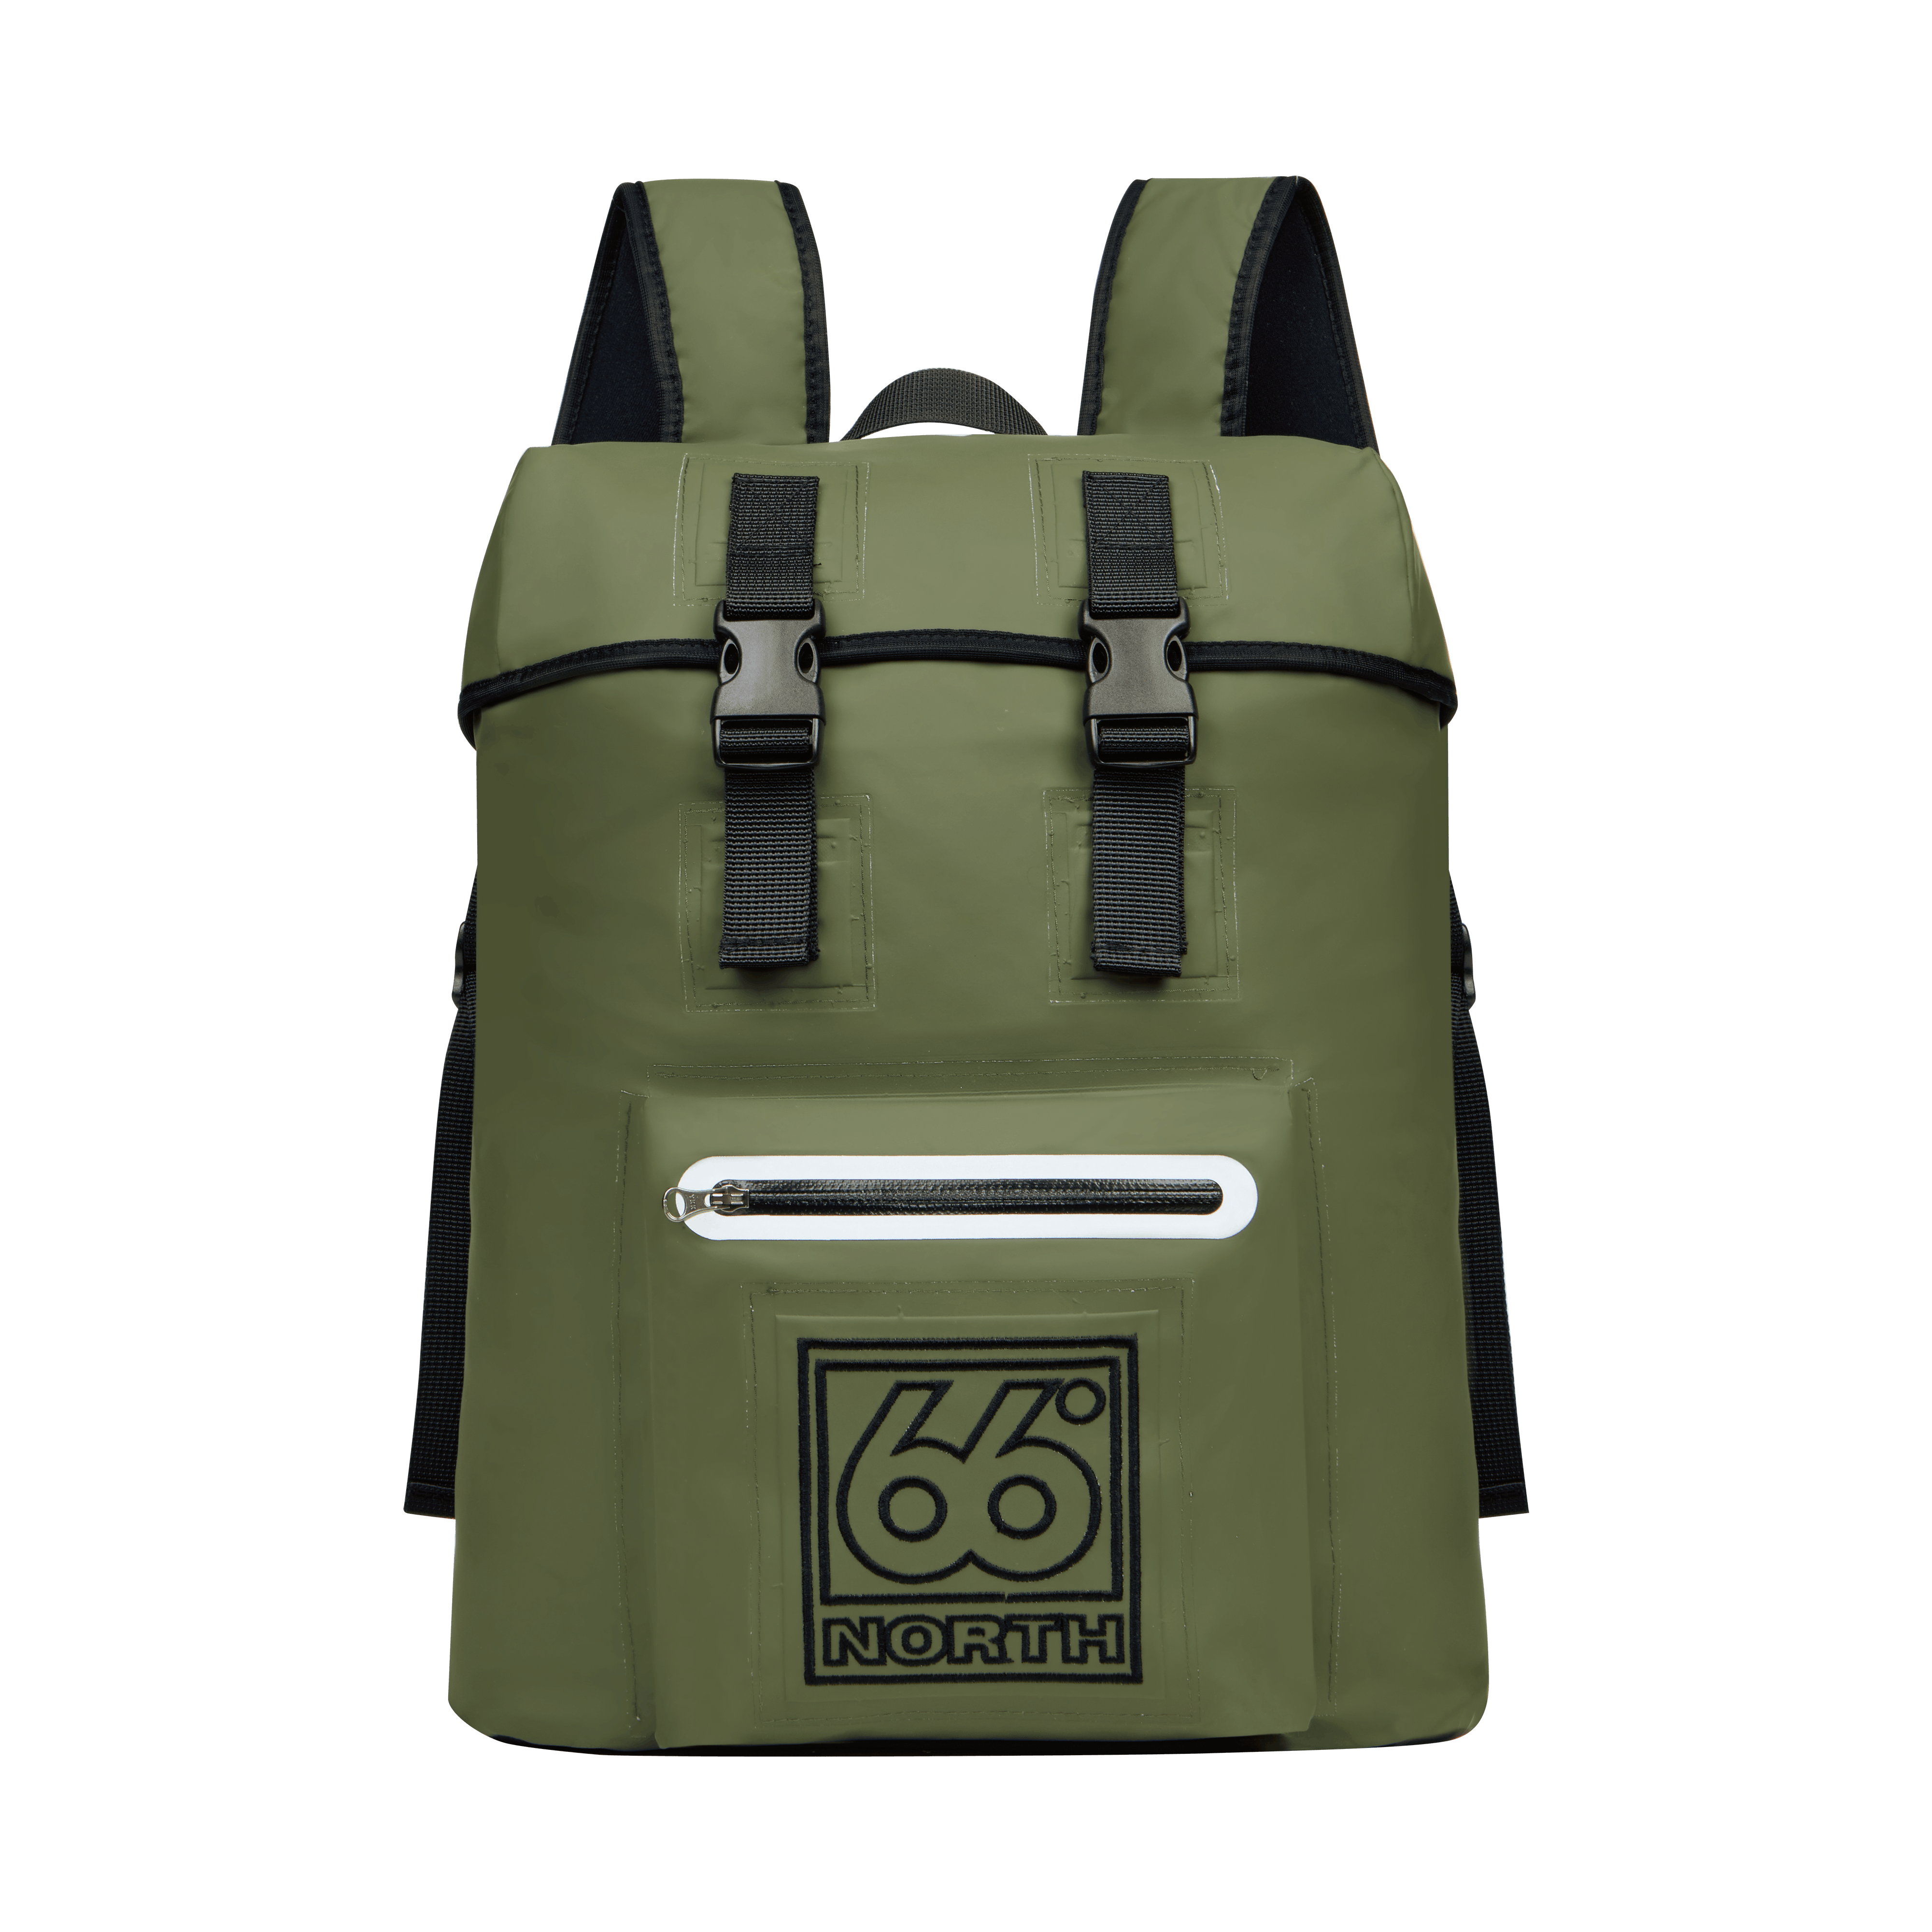 66 North Women's Backpack Accessories In Olive